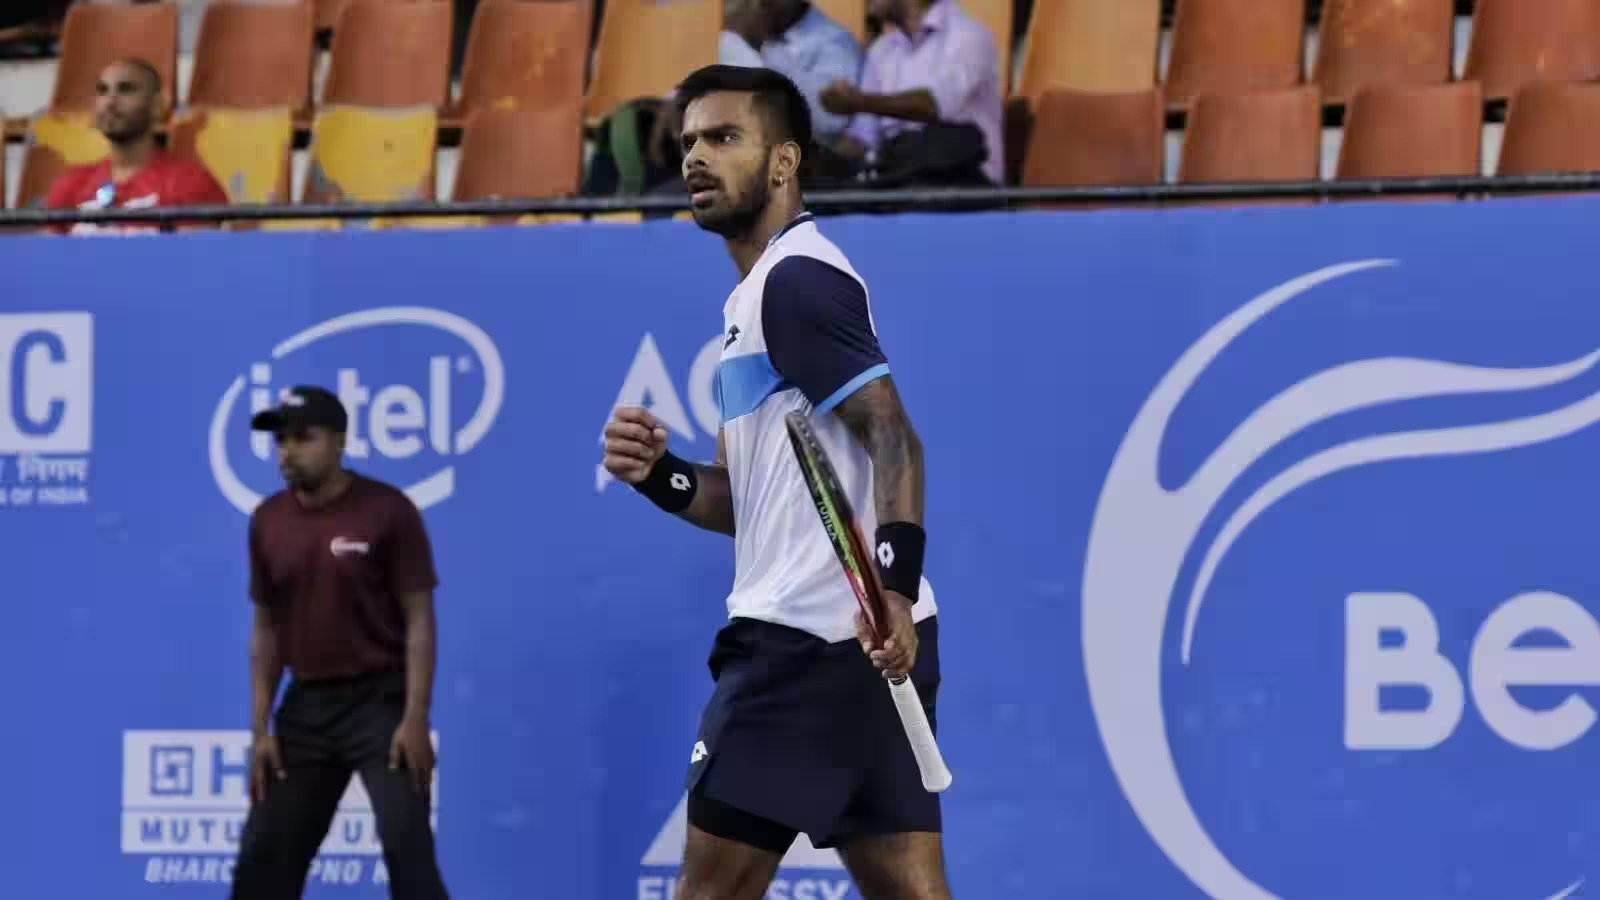 Dubai Open LIVE: Schedule, Top seeds, Draw, Prize Money, LIVE Streaming,  All you need to know about Dubai Open 2023 LIVE - Check Out